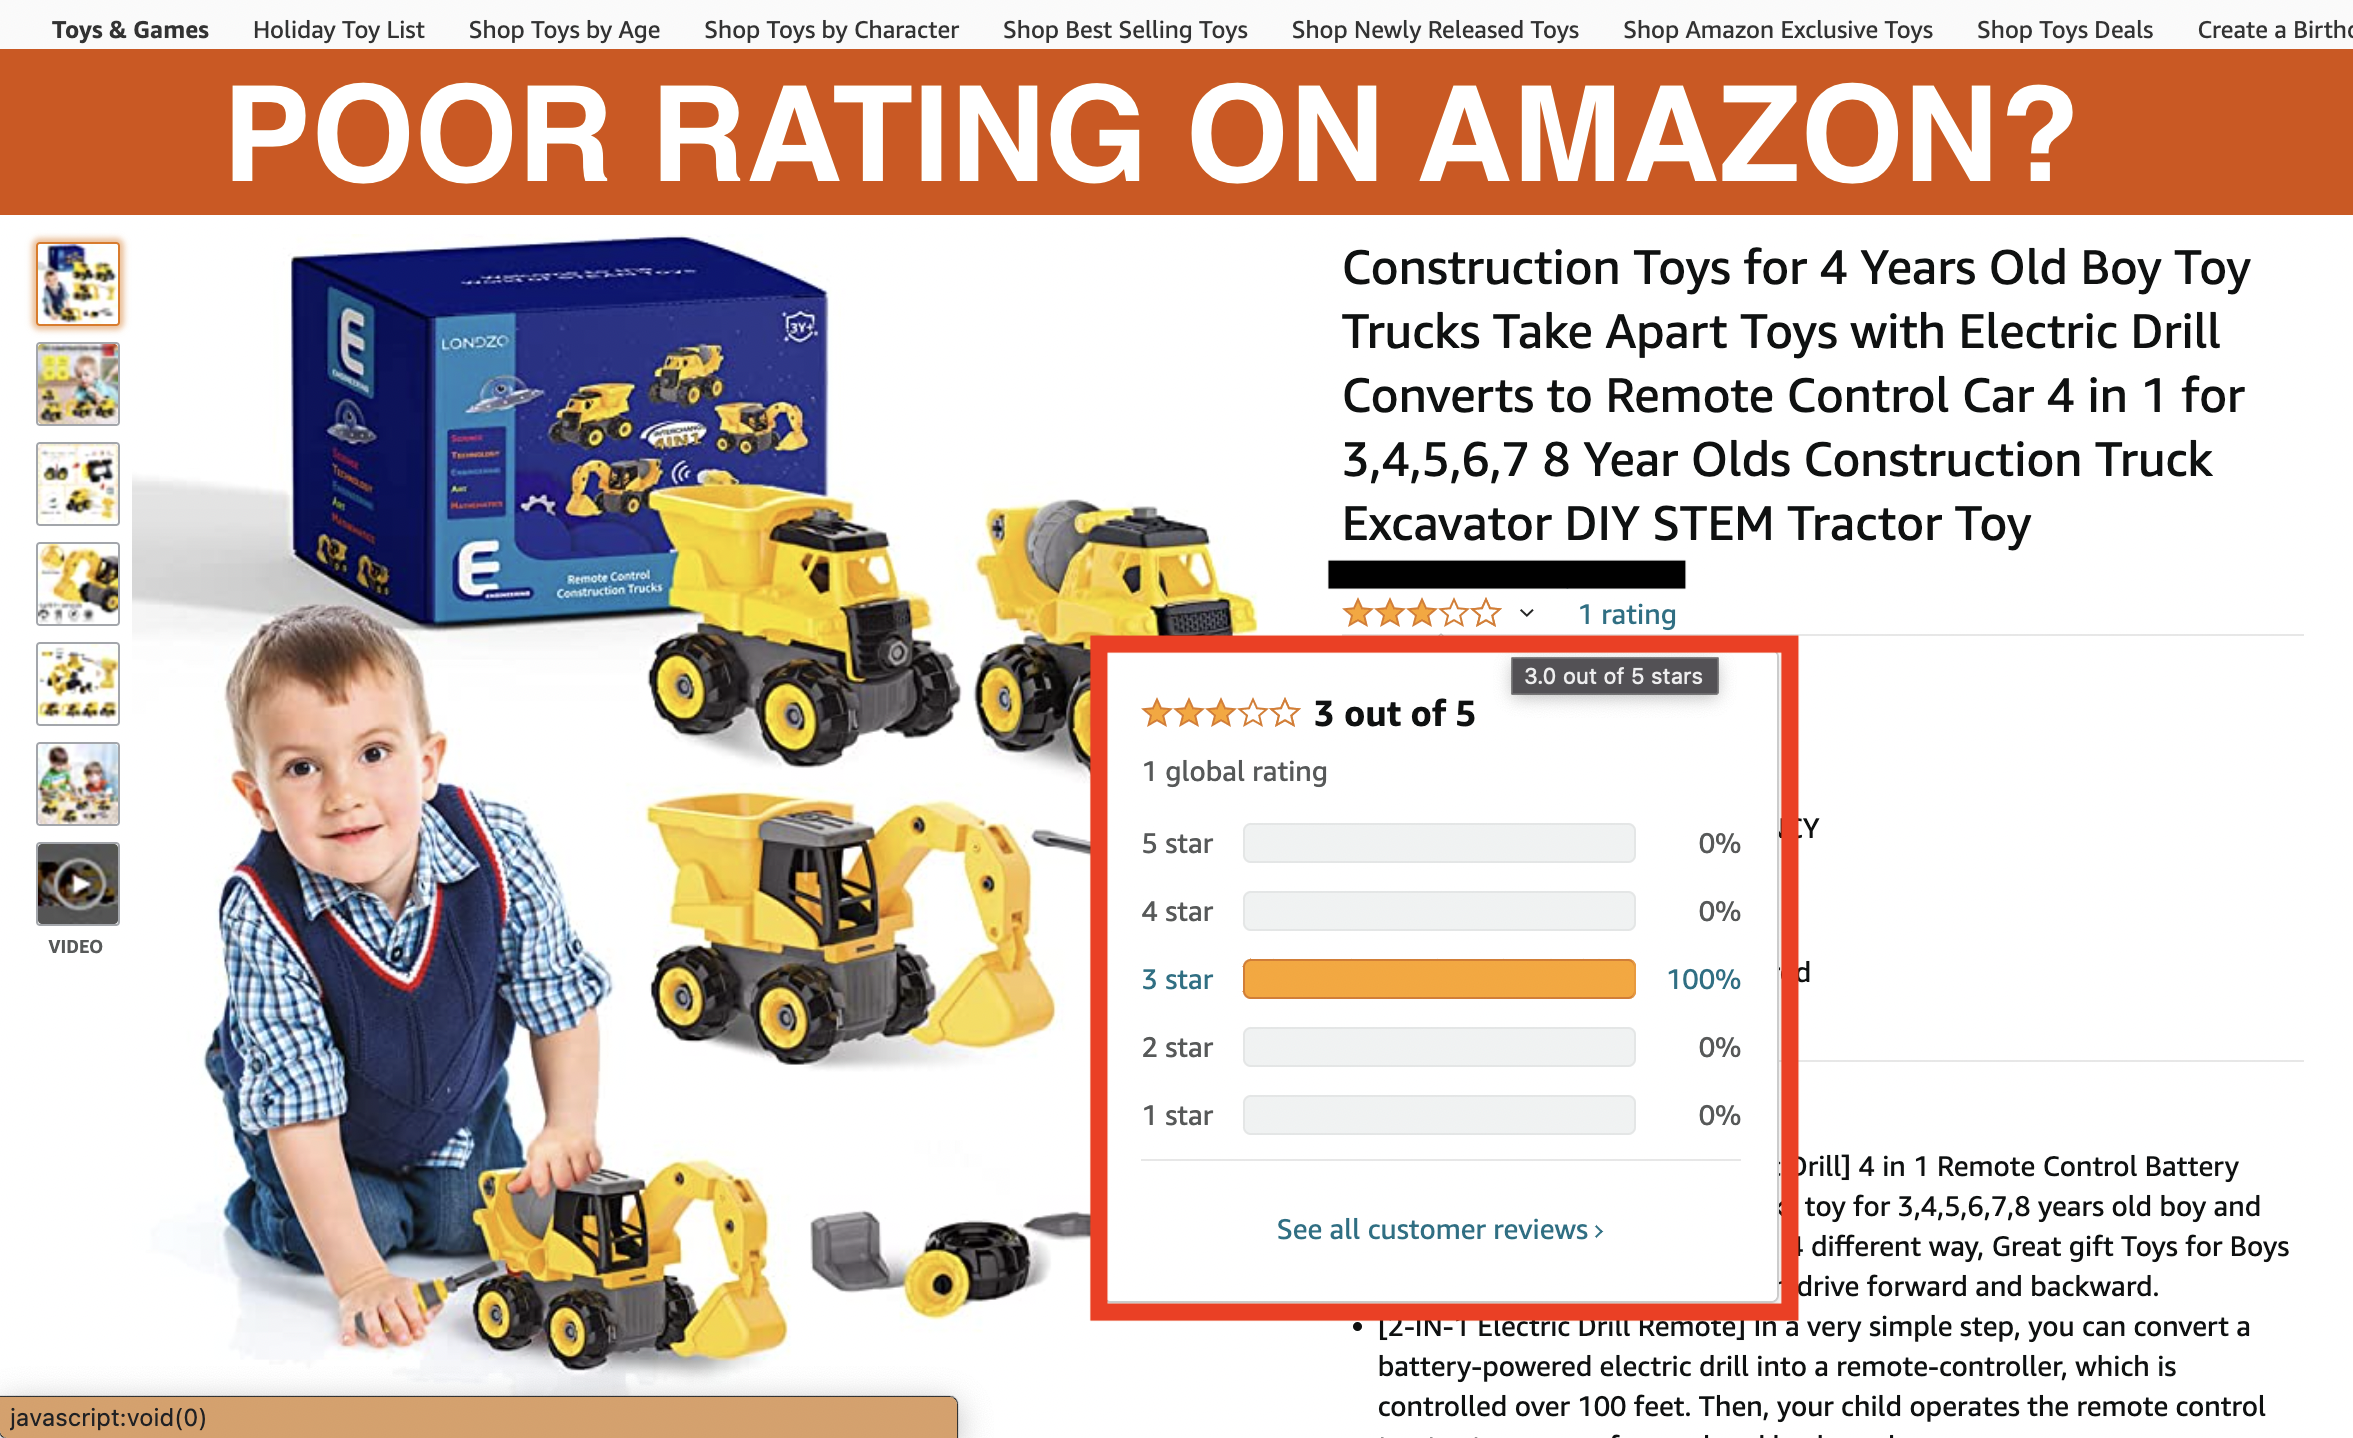 How to make the best of your negative ratings on Amazon?